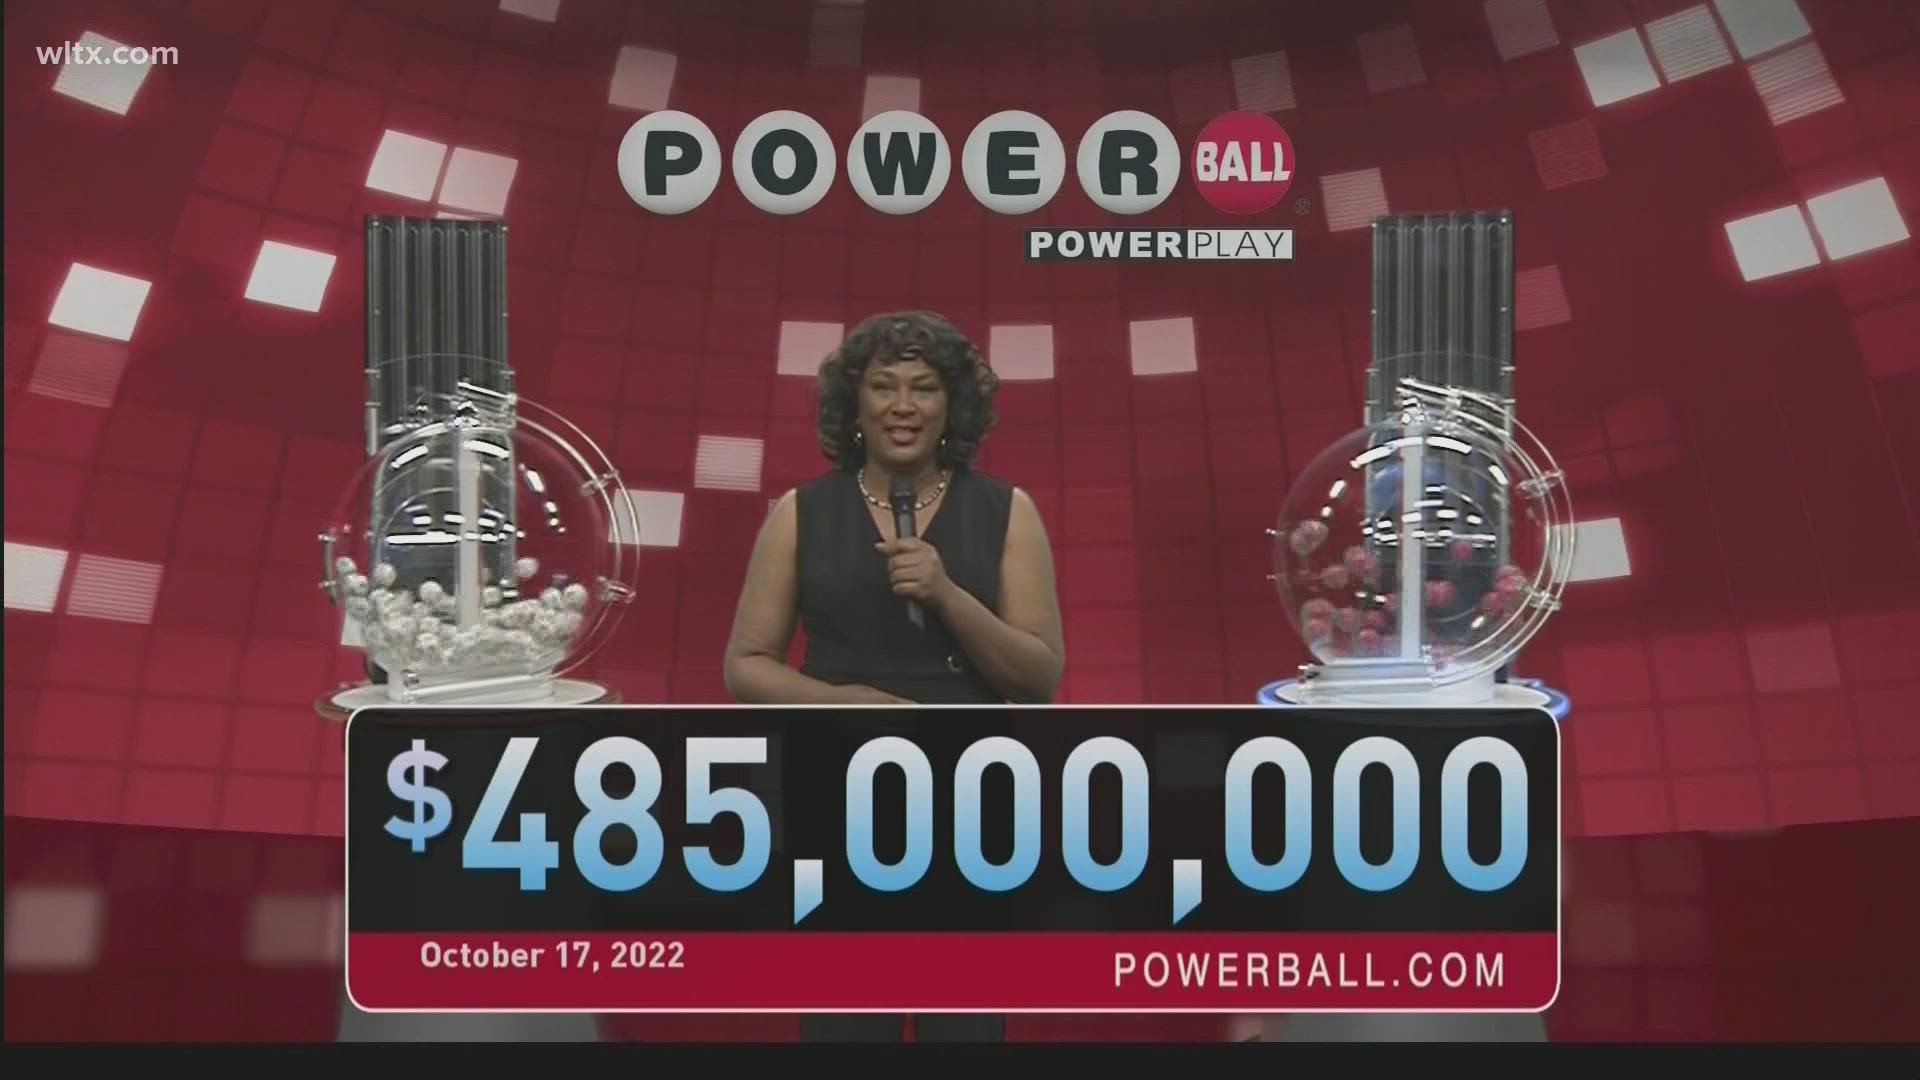 Here are the winning Powerball numbers for Monday, October 17, 2022.